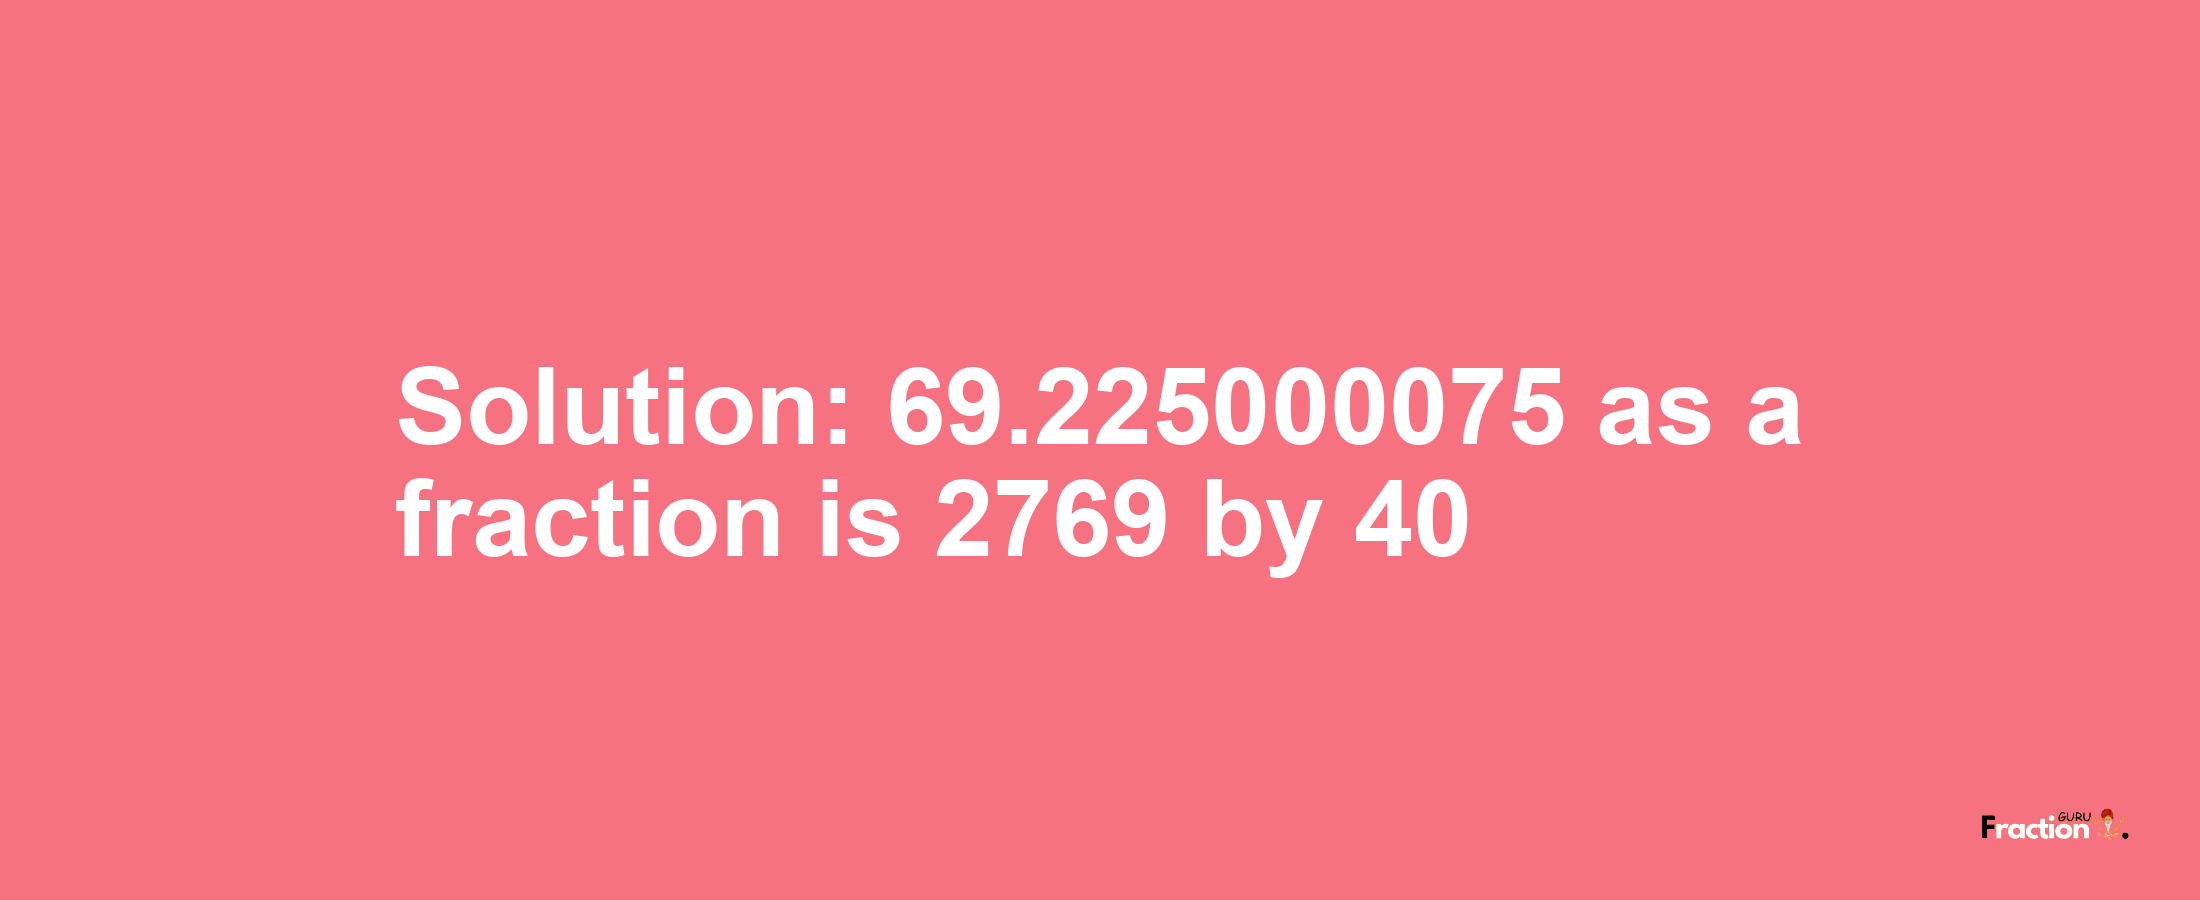 Solution:69.225000075 as a fraction is 2769/40